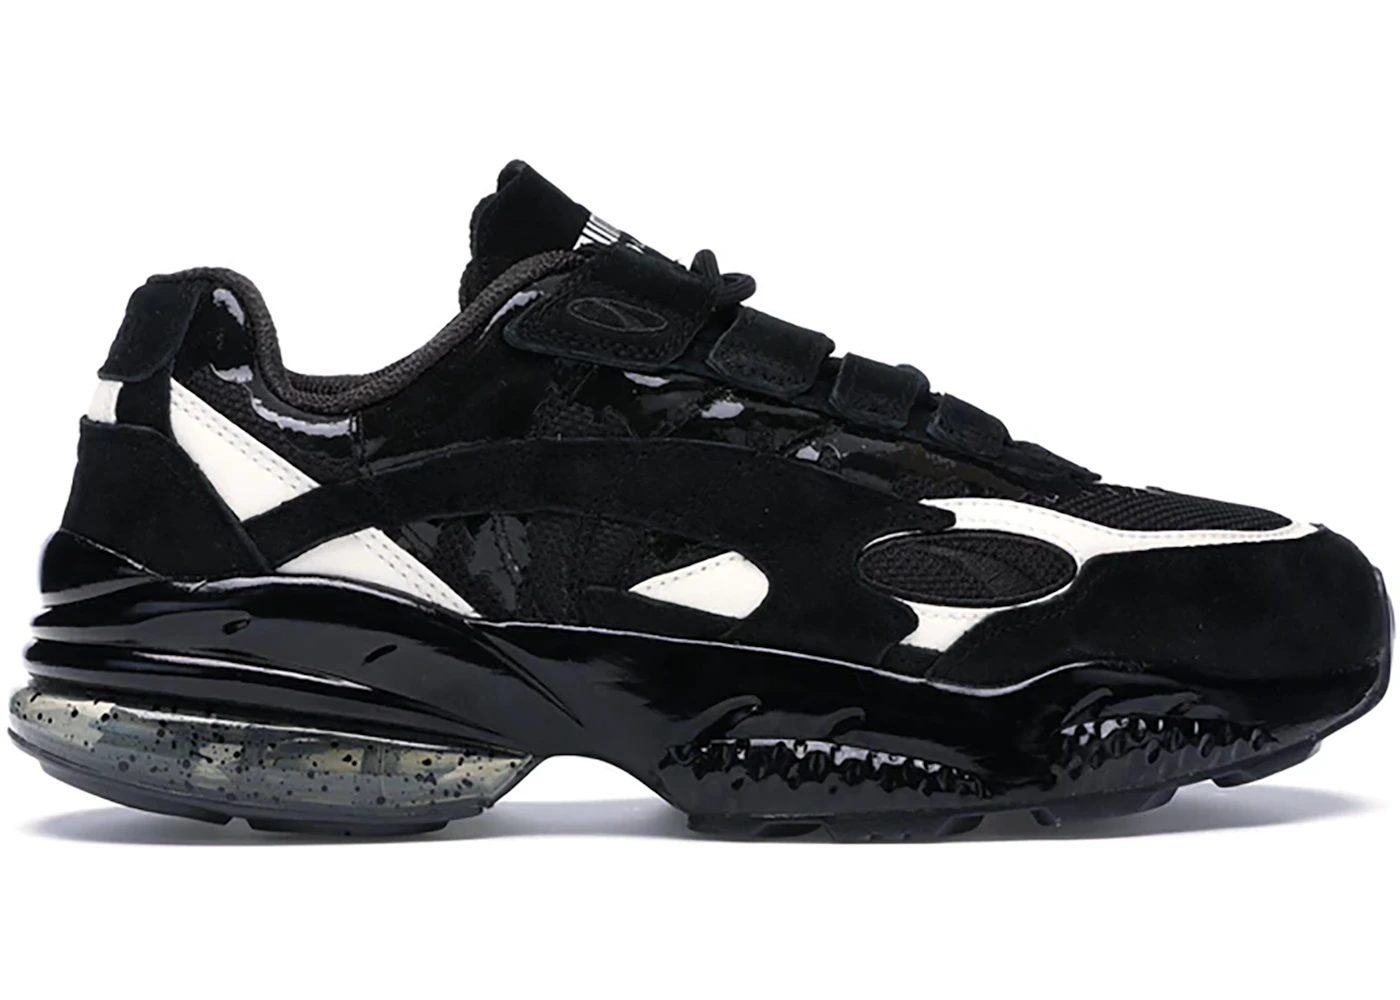 First Look At The Super-Limited BAIT X MARVEL X Puma Cell Venom Carnage ...